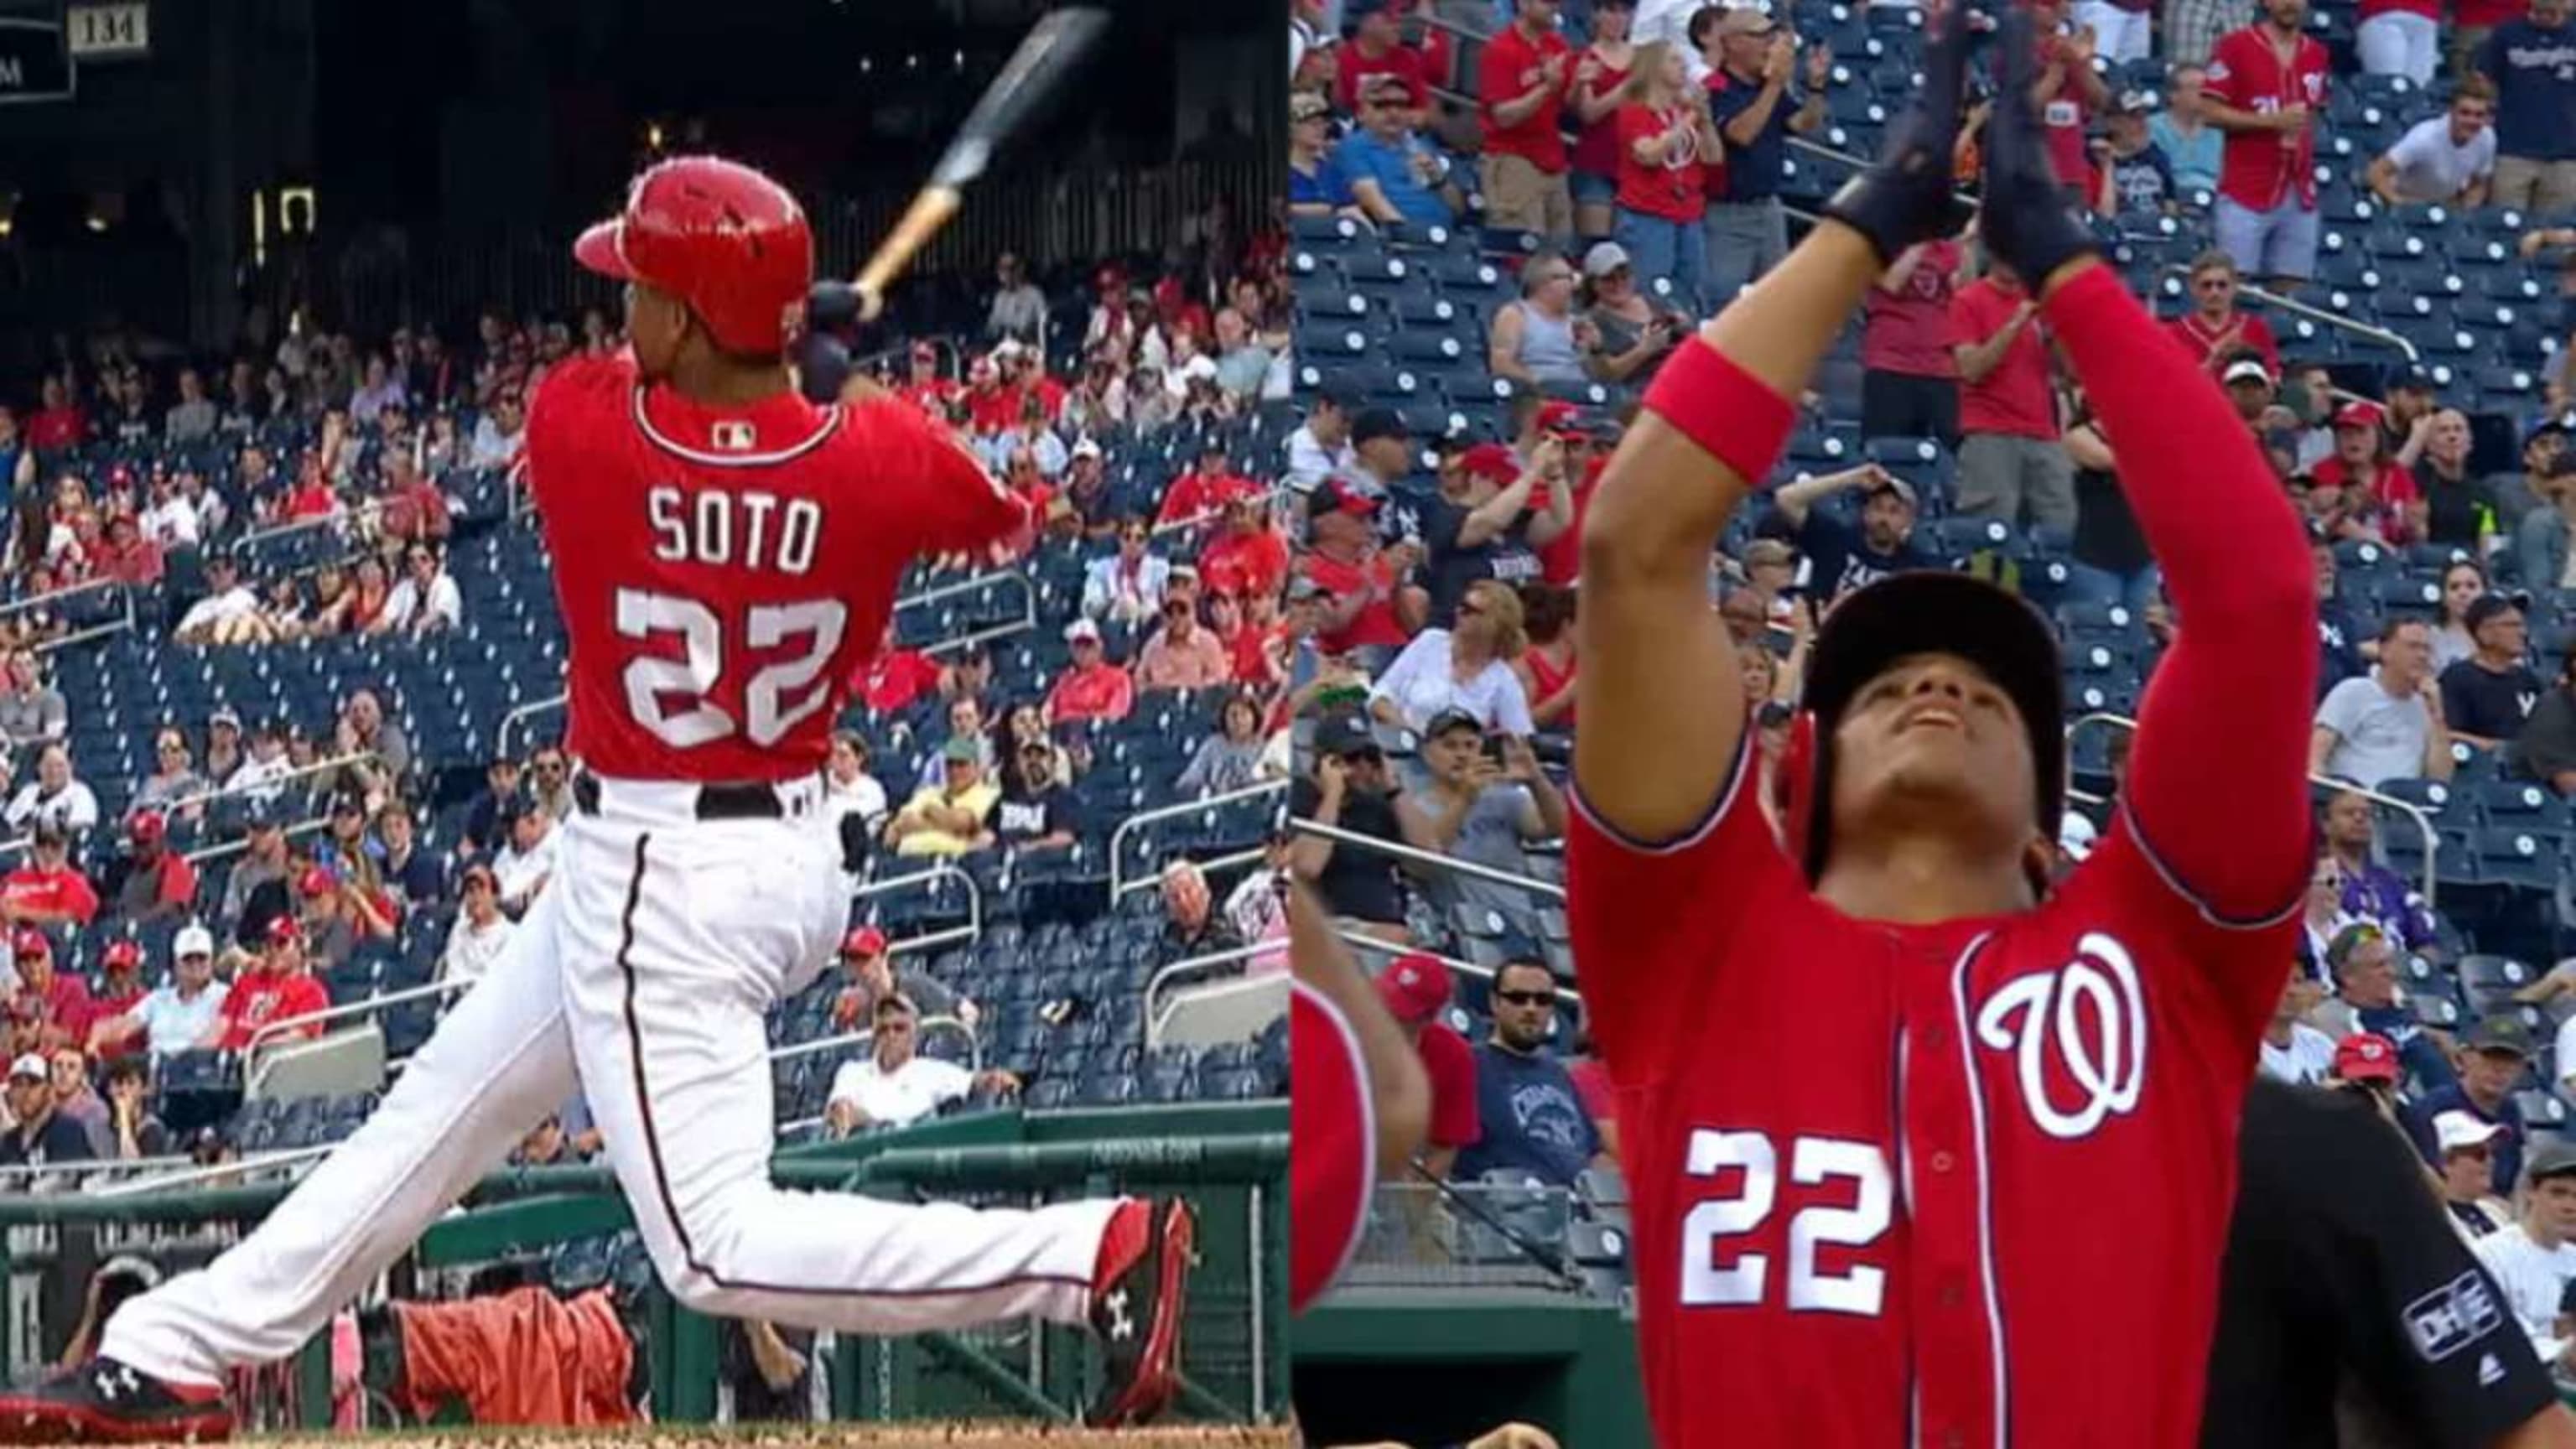 The best images of Juan Soto through the years